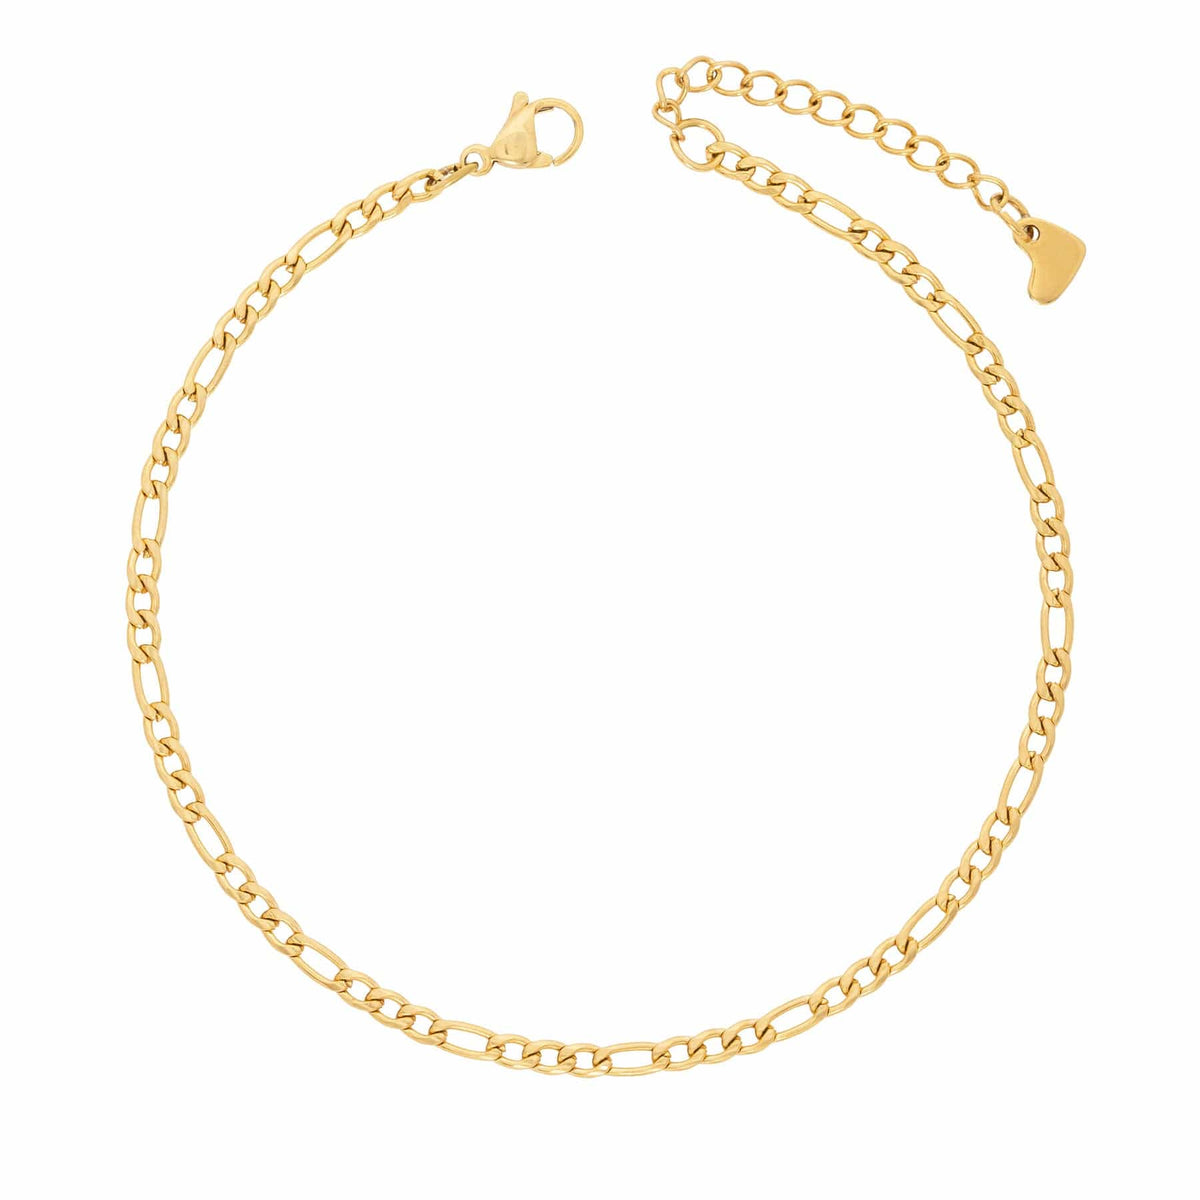 BohoMoon Stainless Steel Regal Figaro Anklet Gold